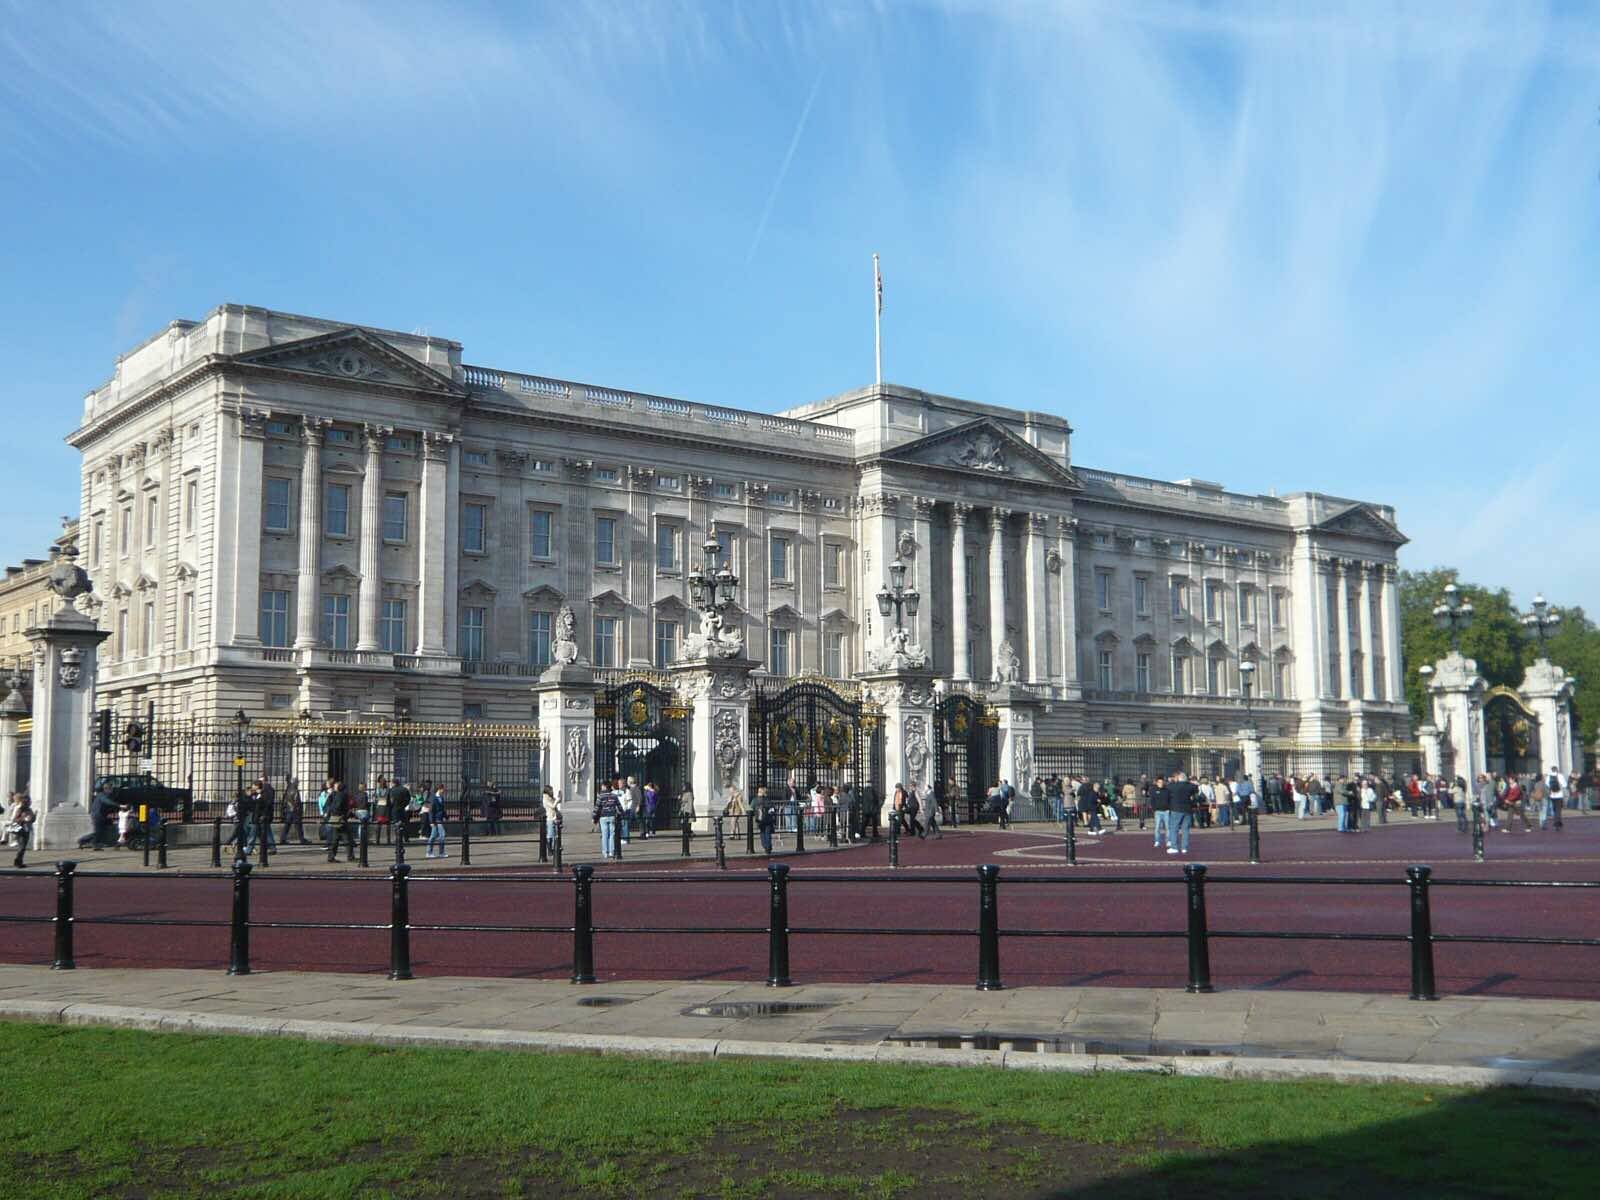 Buckingham Palace Compare Tickets And Tours To Save Time And